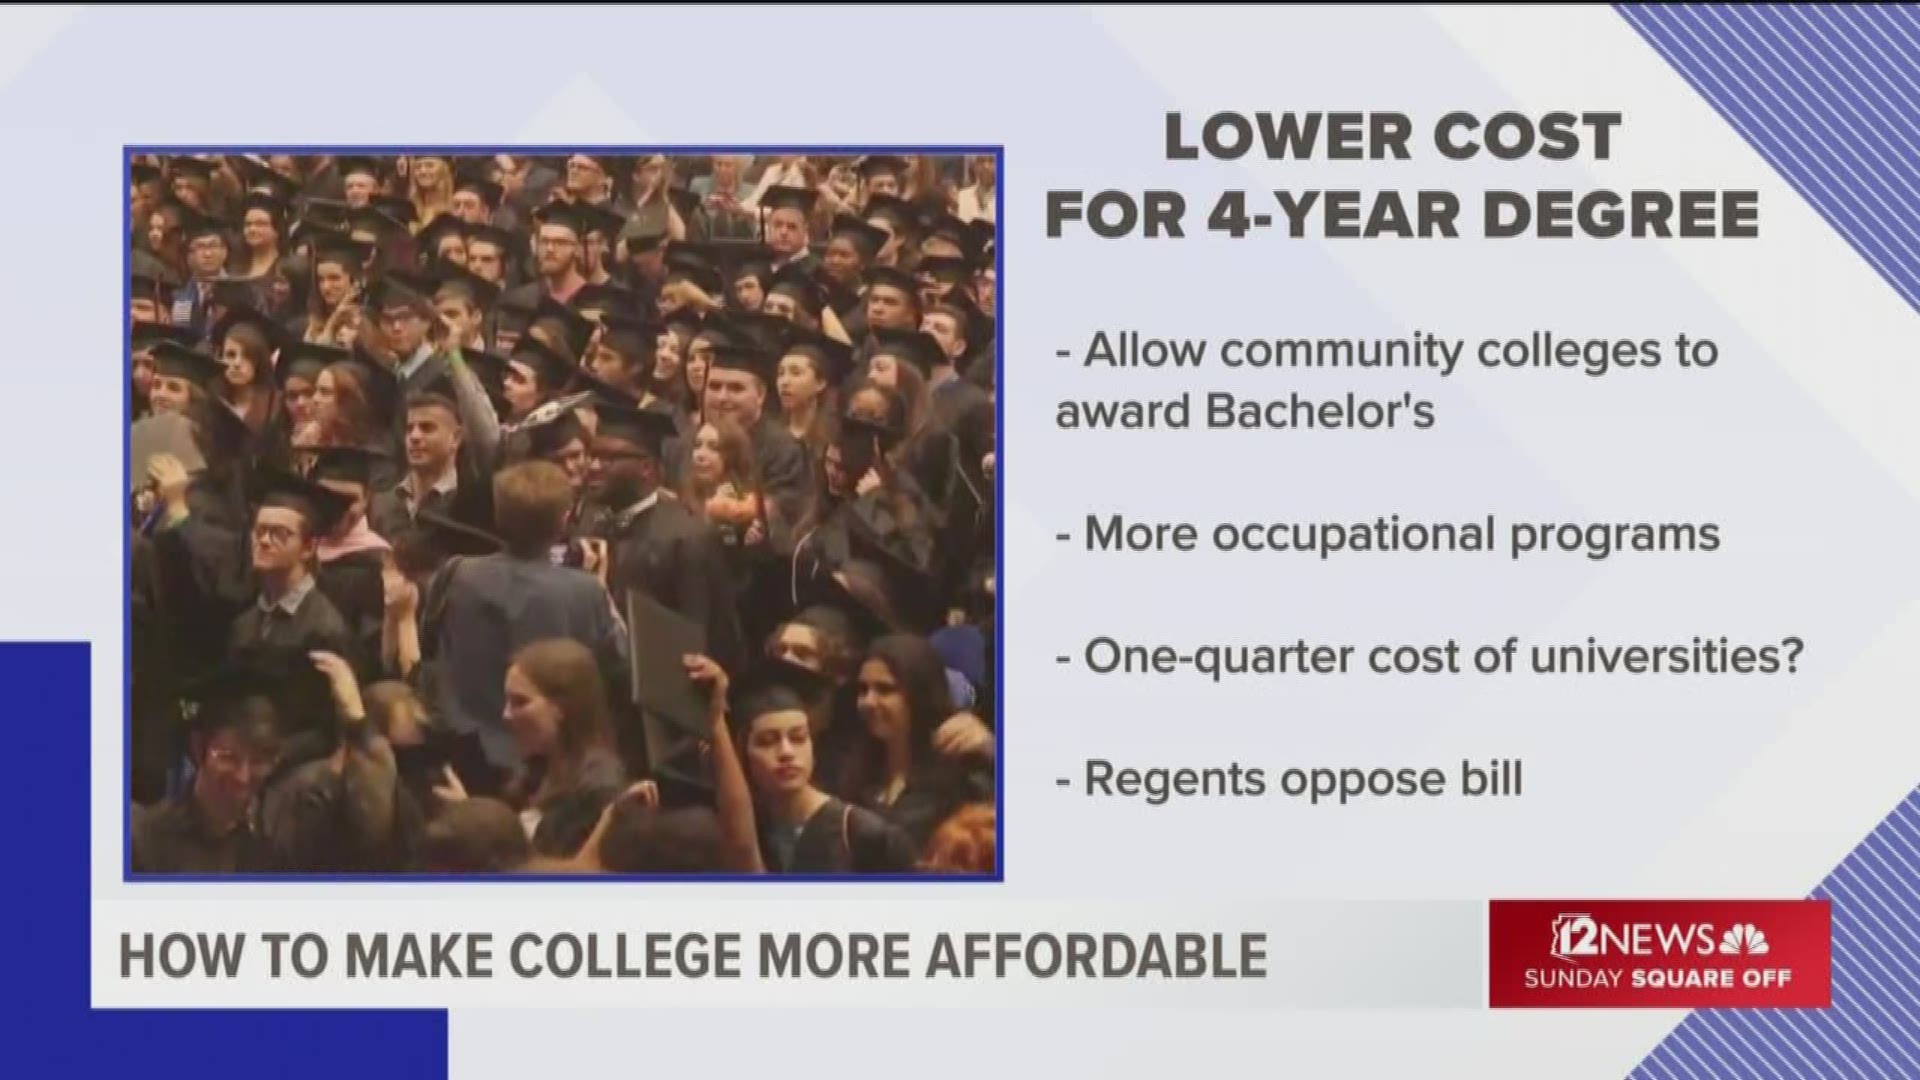 Bill moving through Legislature would allow publicly-funded community colleges to award degrees, at much lower cost.